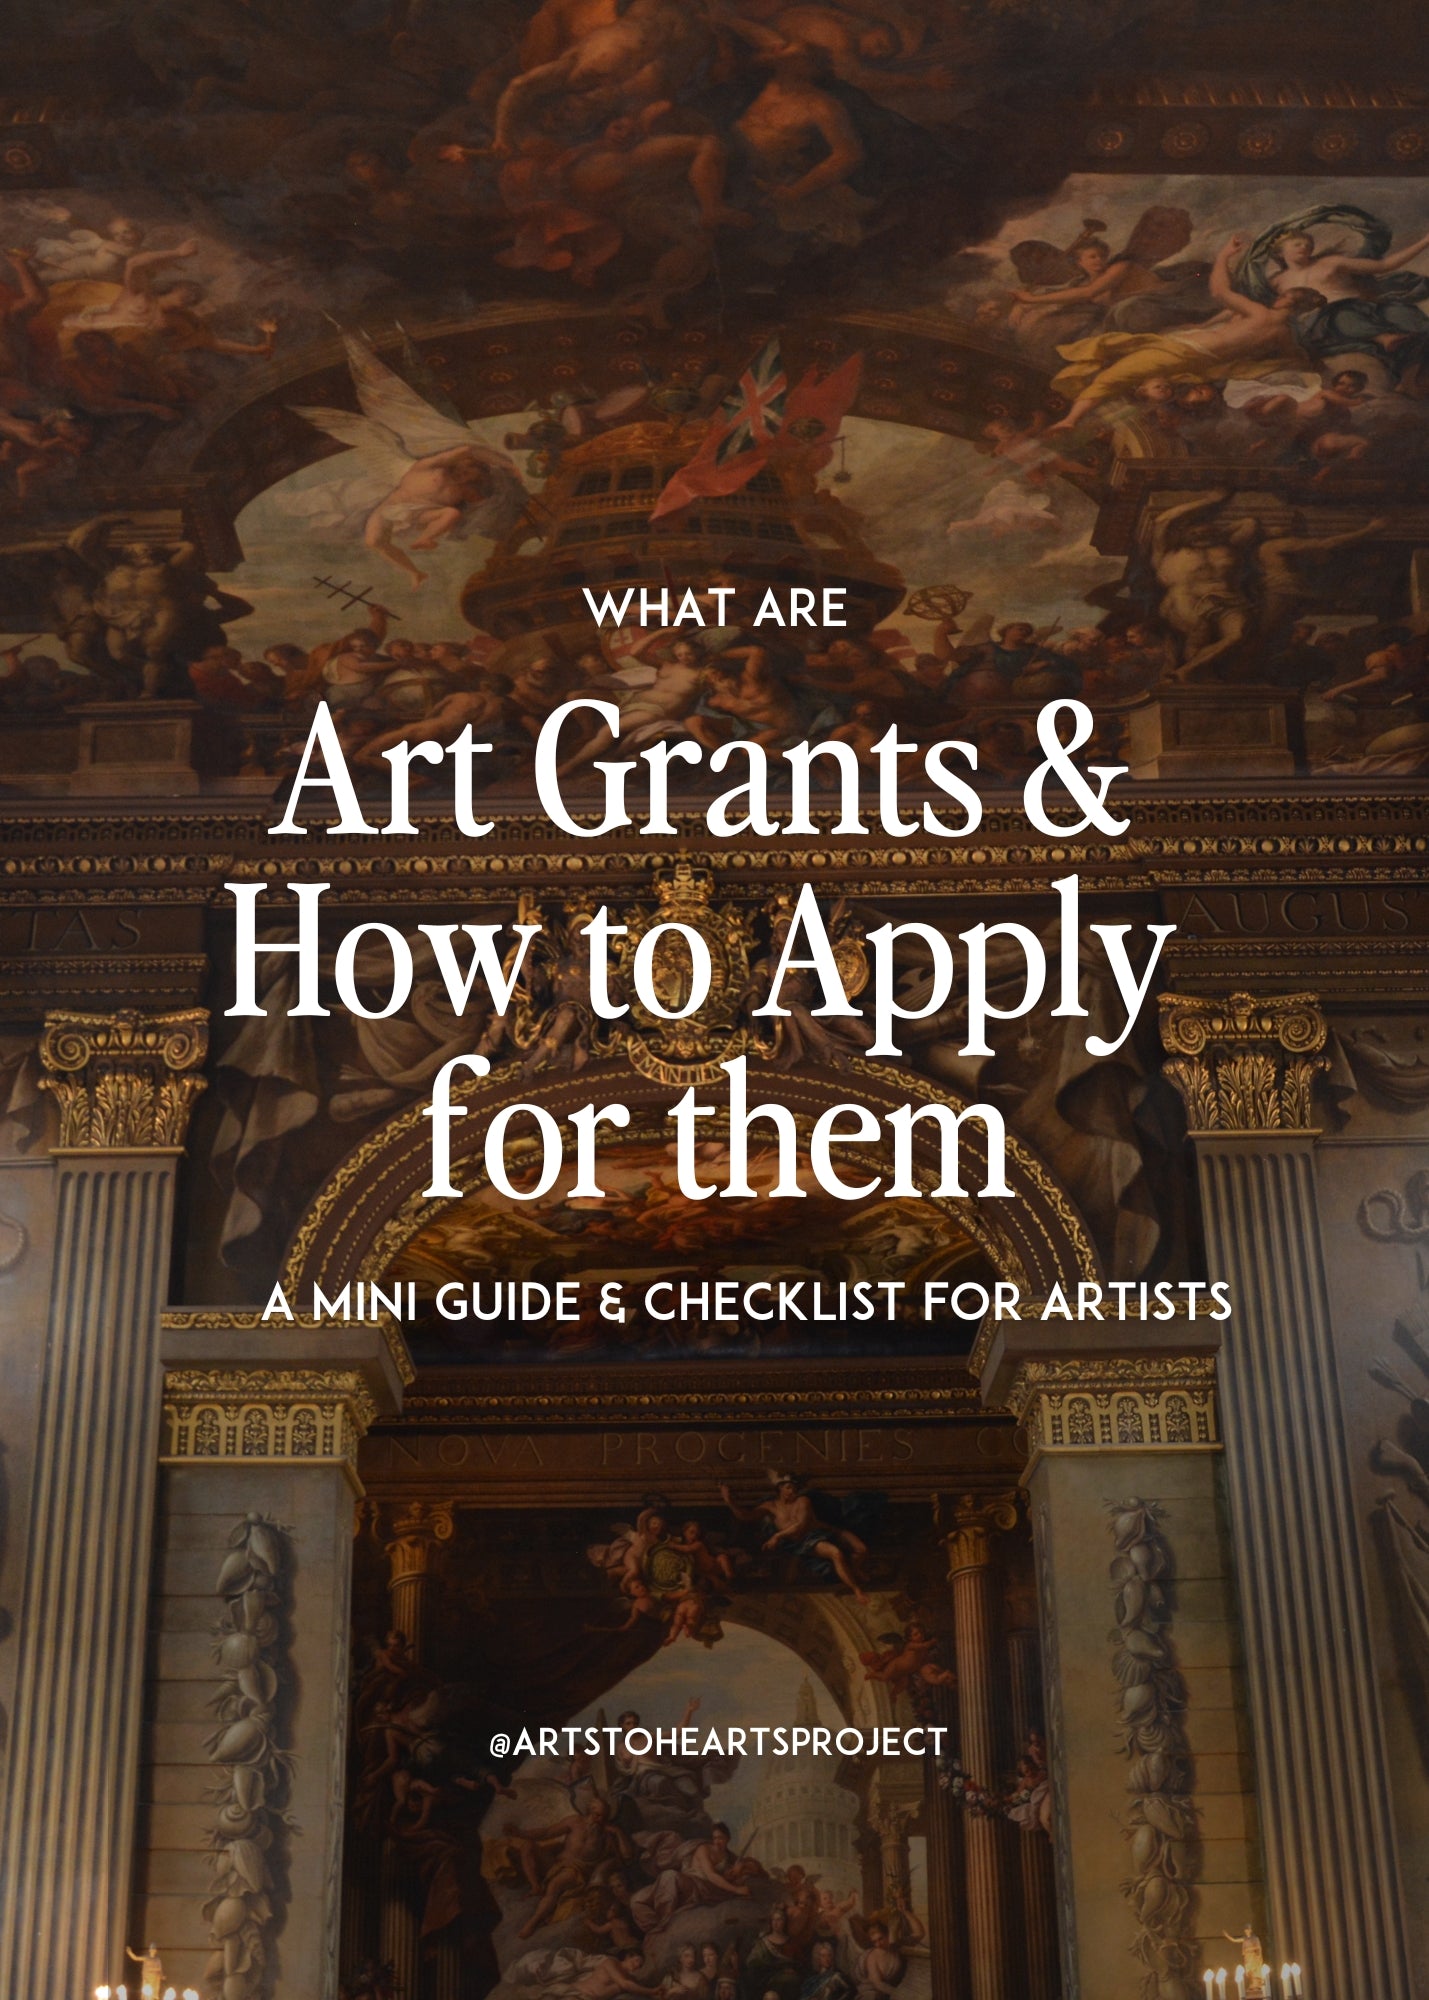 Art Grants & How to Apply for them: Mini Guide & Checklist to get started & organised